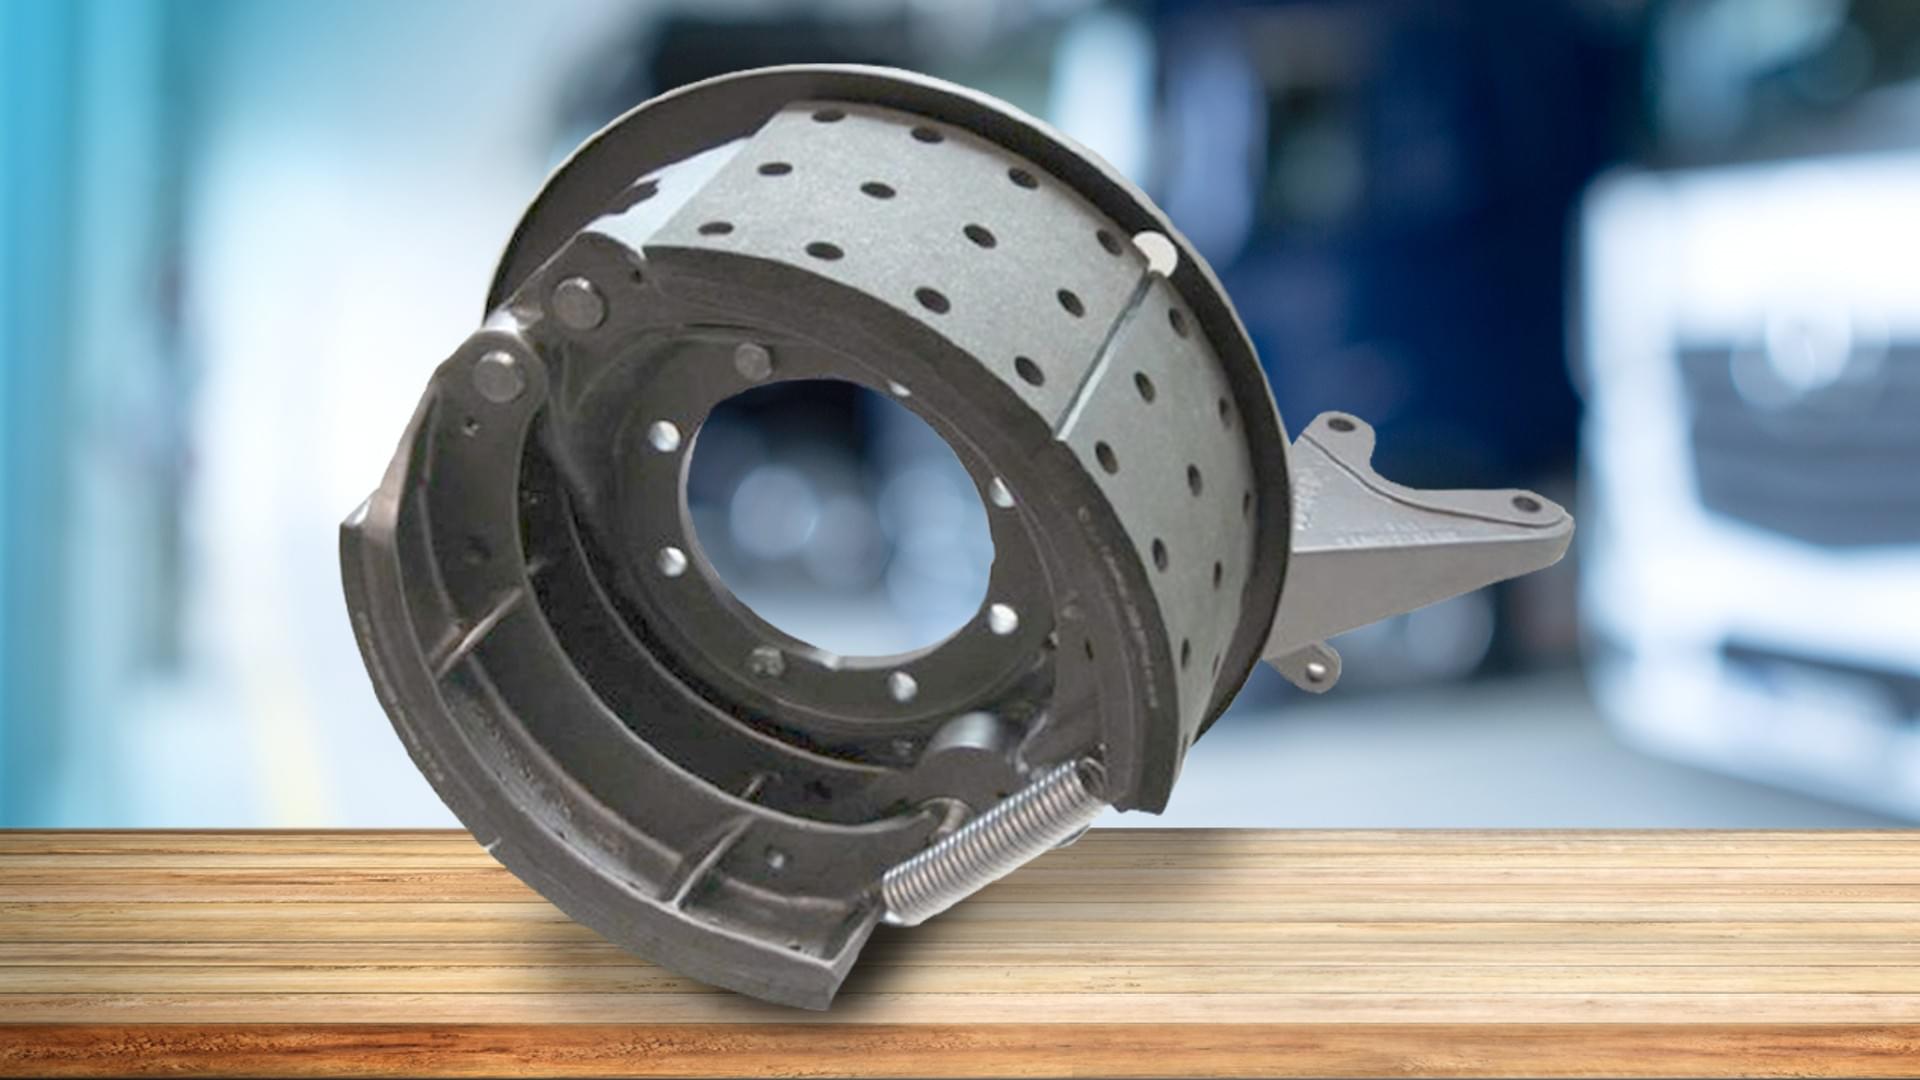 Drum brakes: The key advantages of drum brakes are their robustness and reliability.